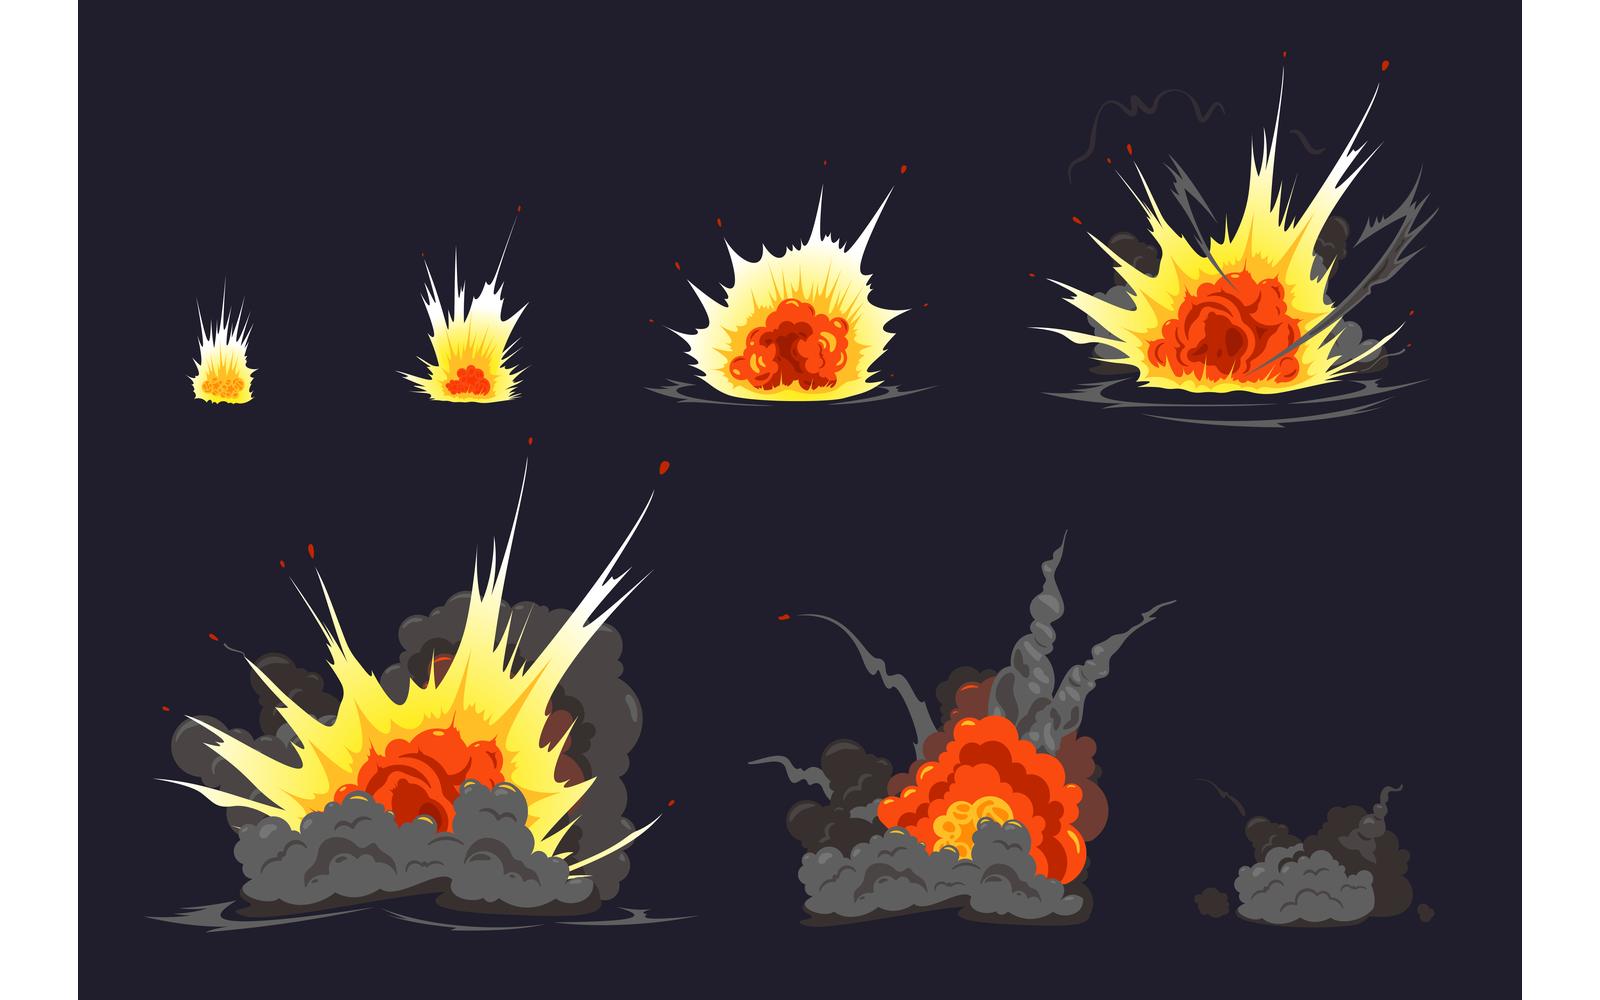 Bomb Explosion Fire Bang Animation 201251810 Vector Illustration Concept